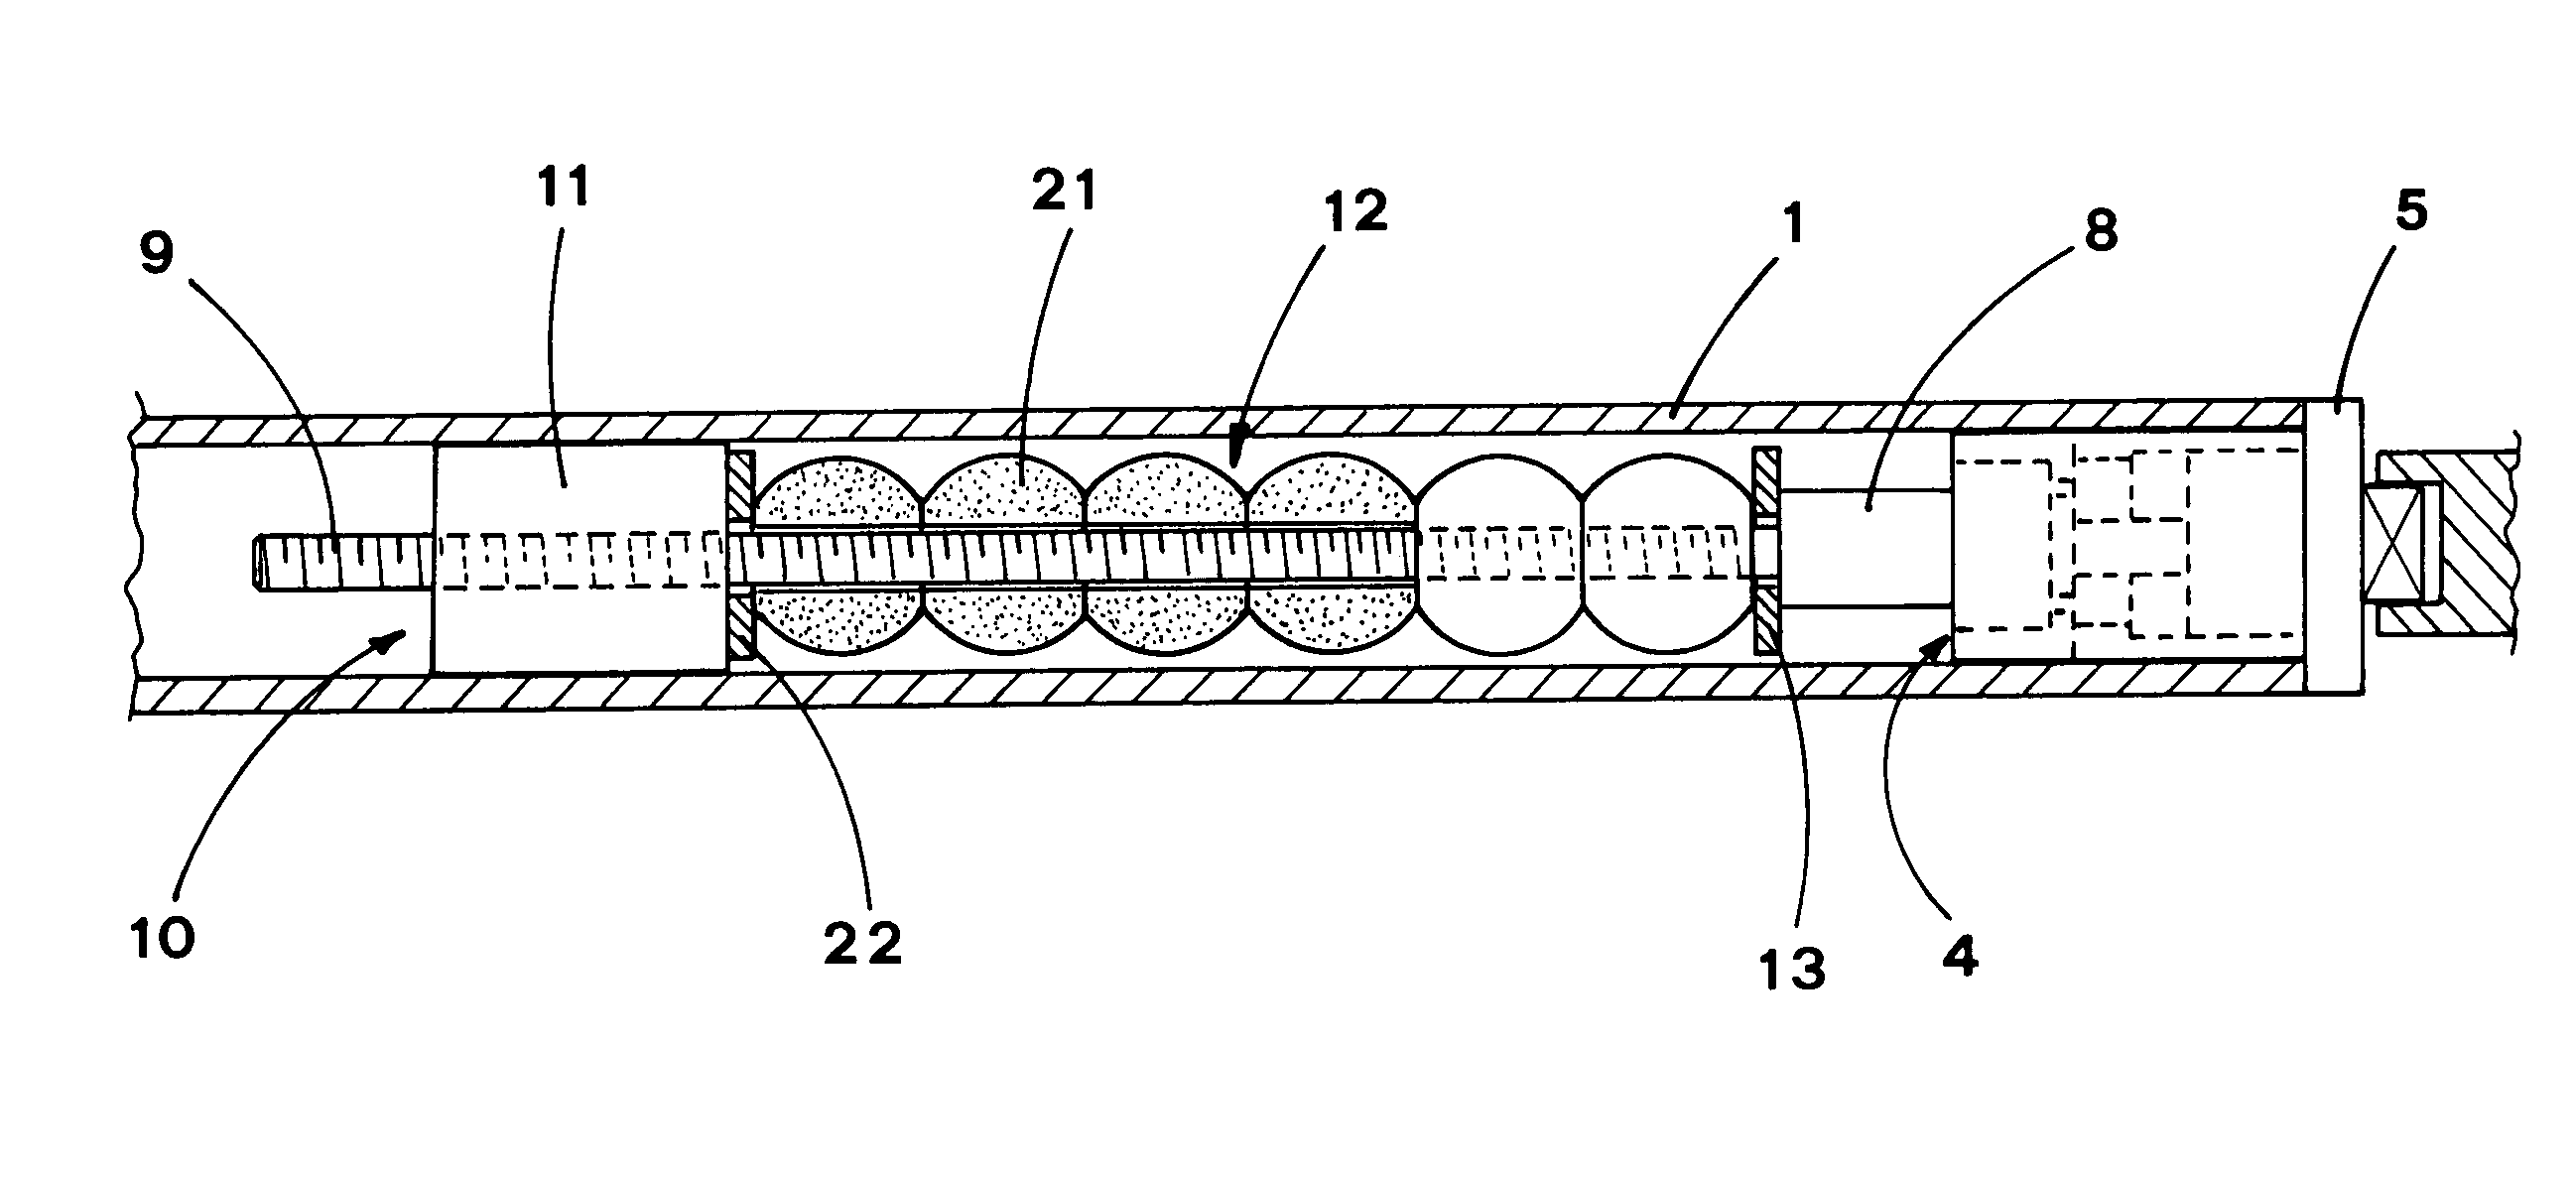 Friction device for roll-up curtains and the like